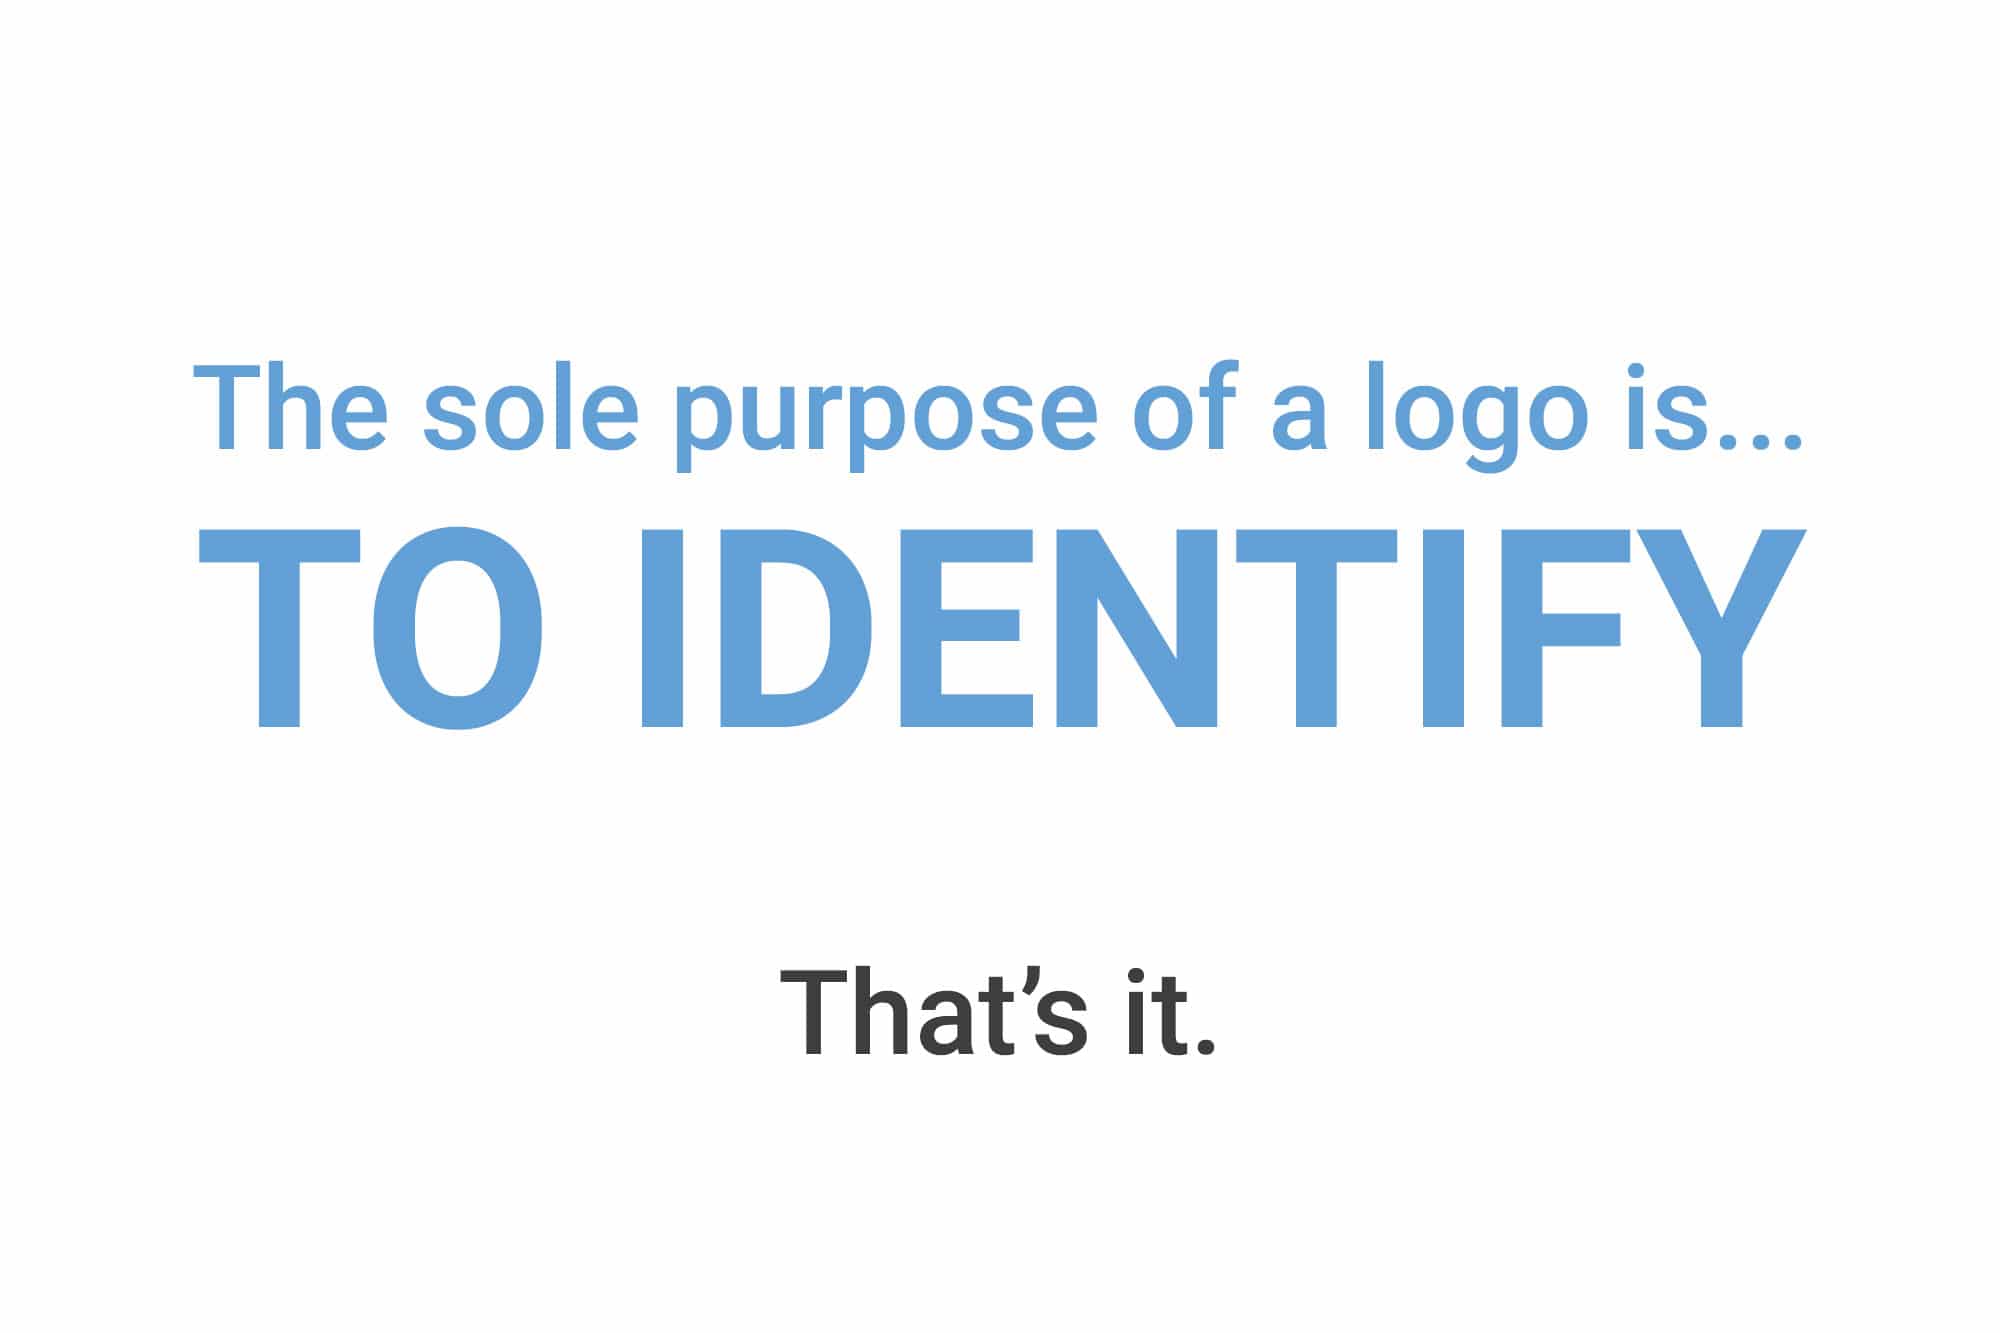 The purpose of a logo design is to identify